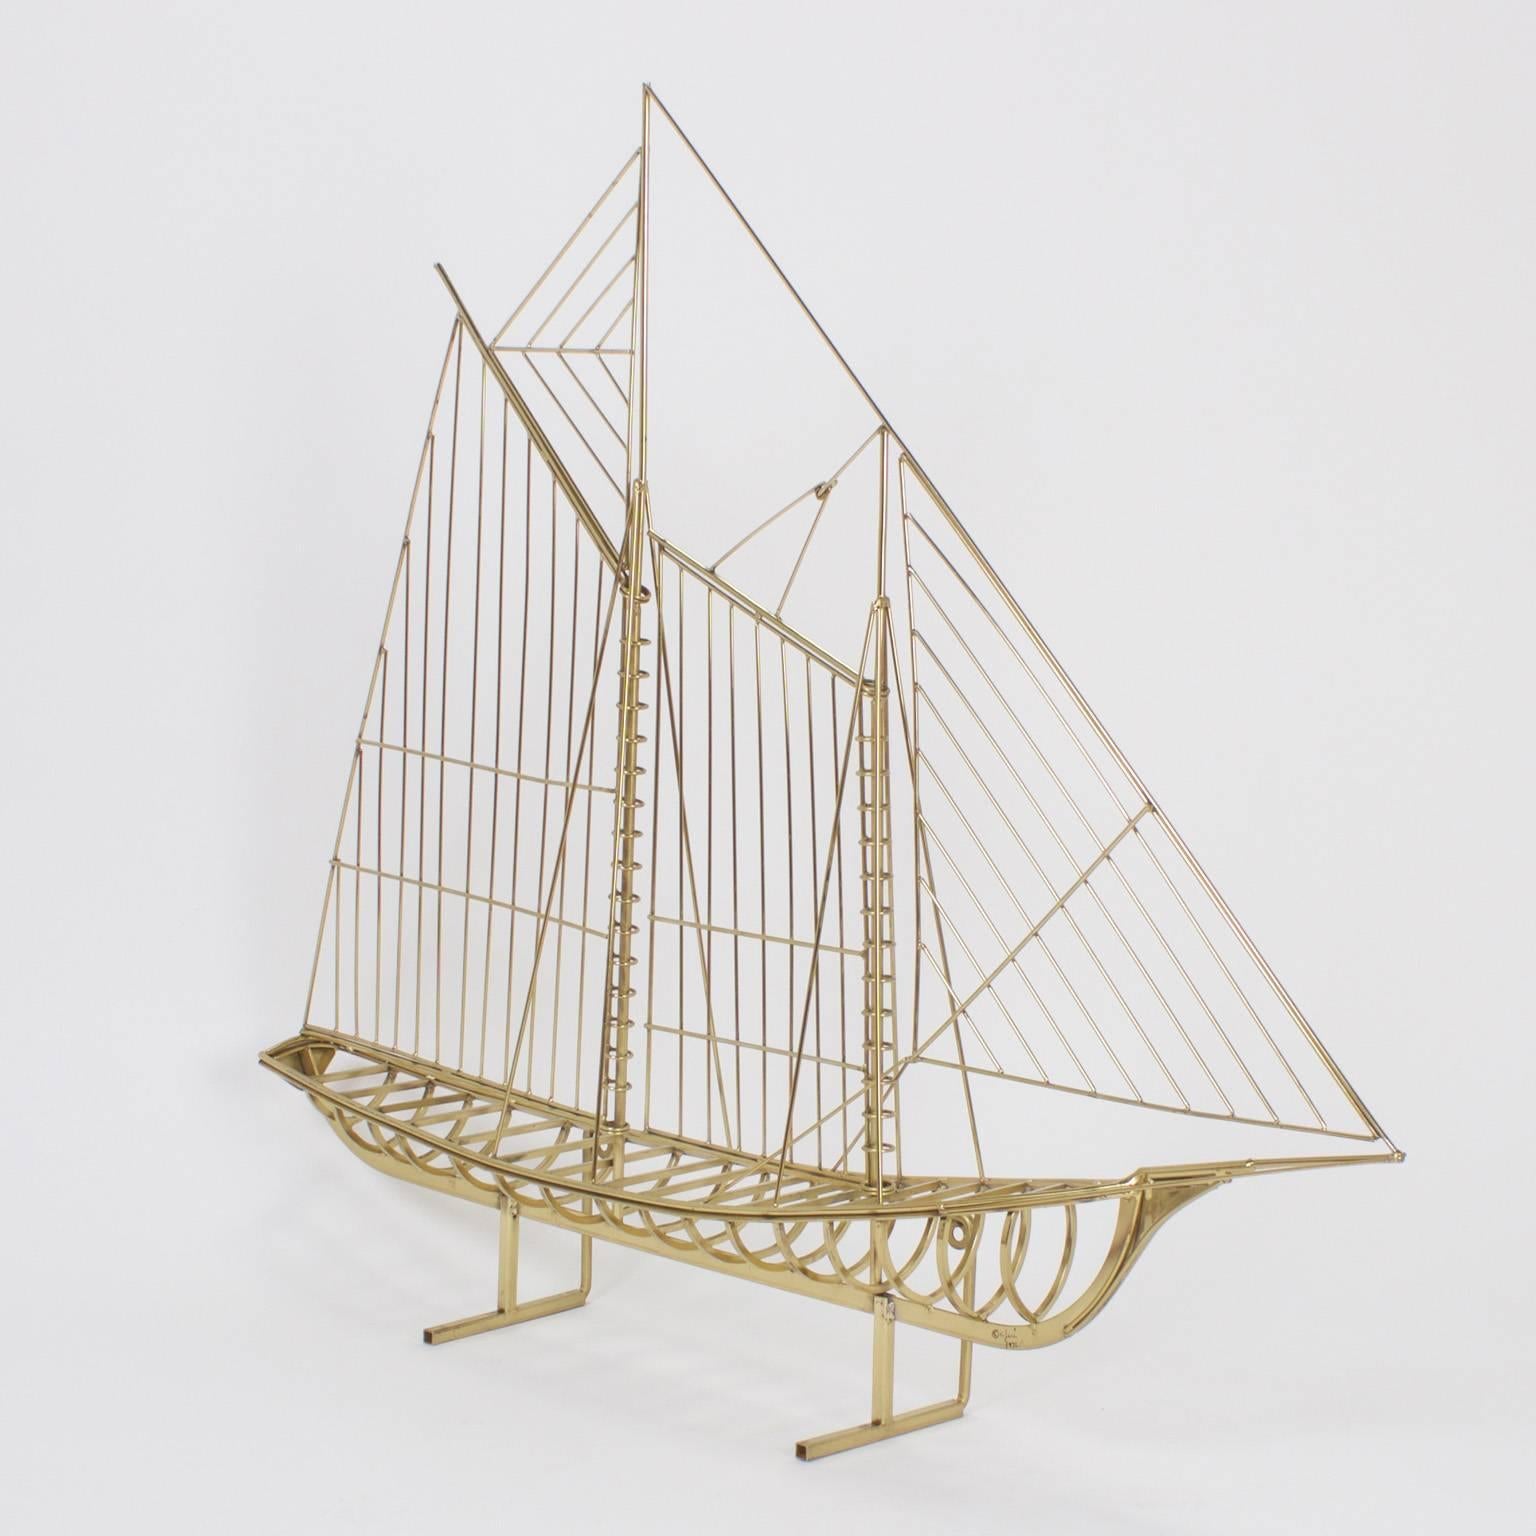 As if it were a three dimensional drawing, this mid century modern brass plated sail boat sculpture has bold decorative appeal. Can be displayed on a flat surface or mounted to a wall. Signed C. Jere 1976.